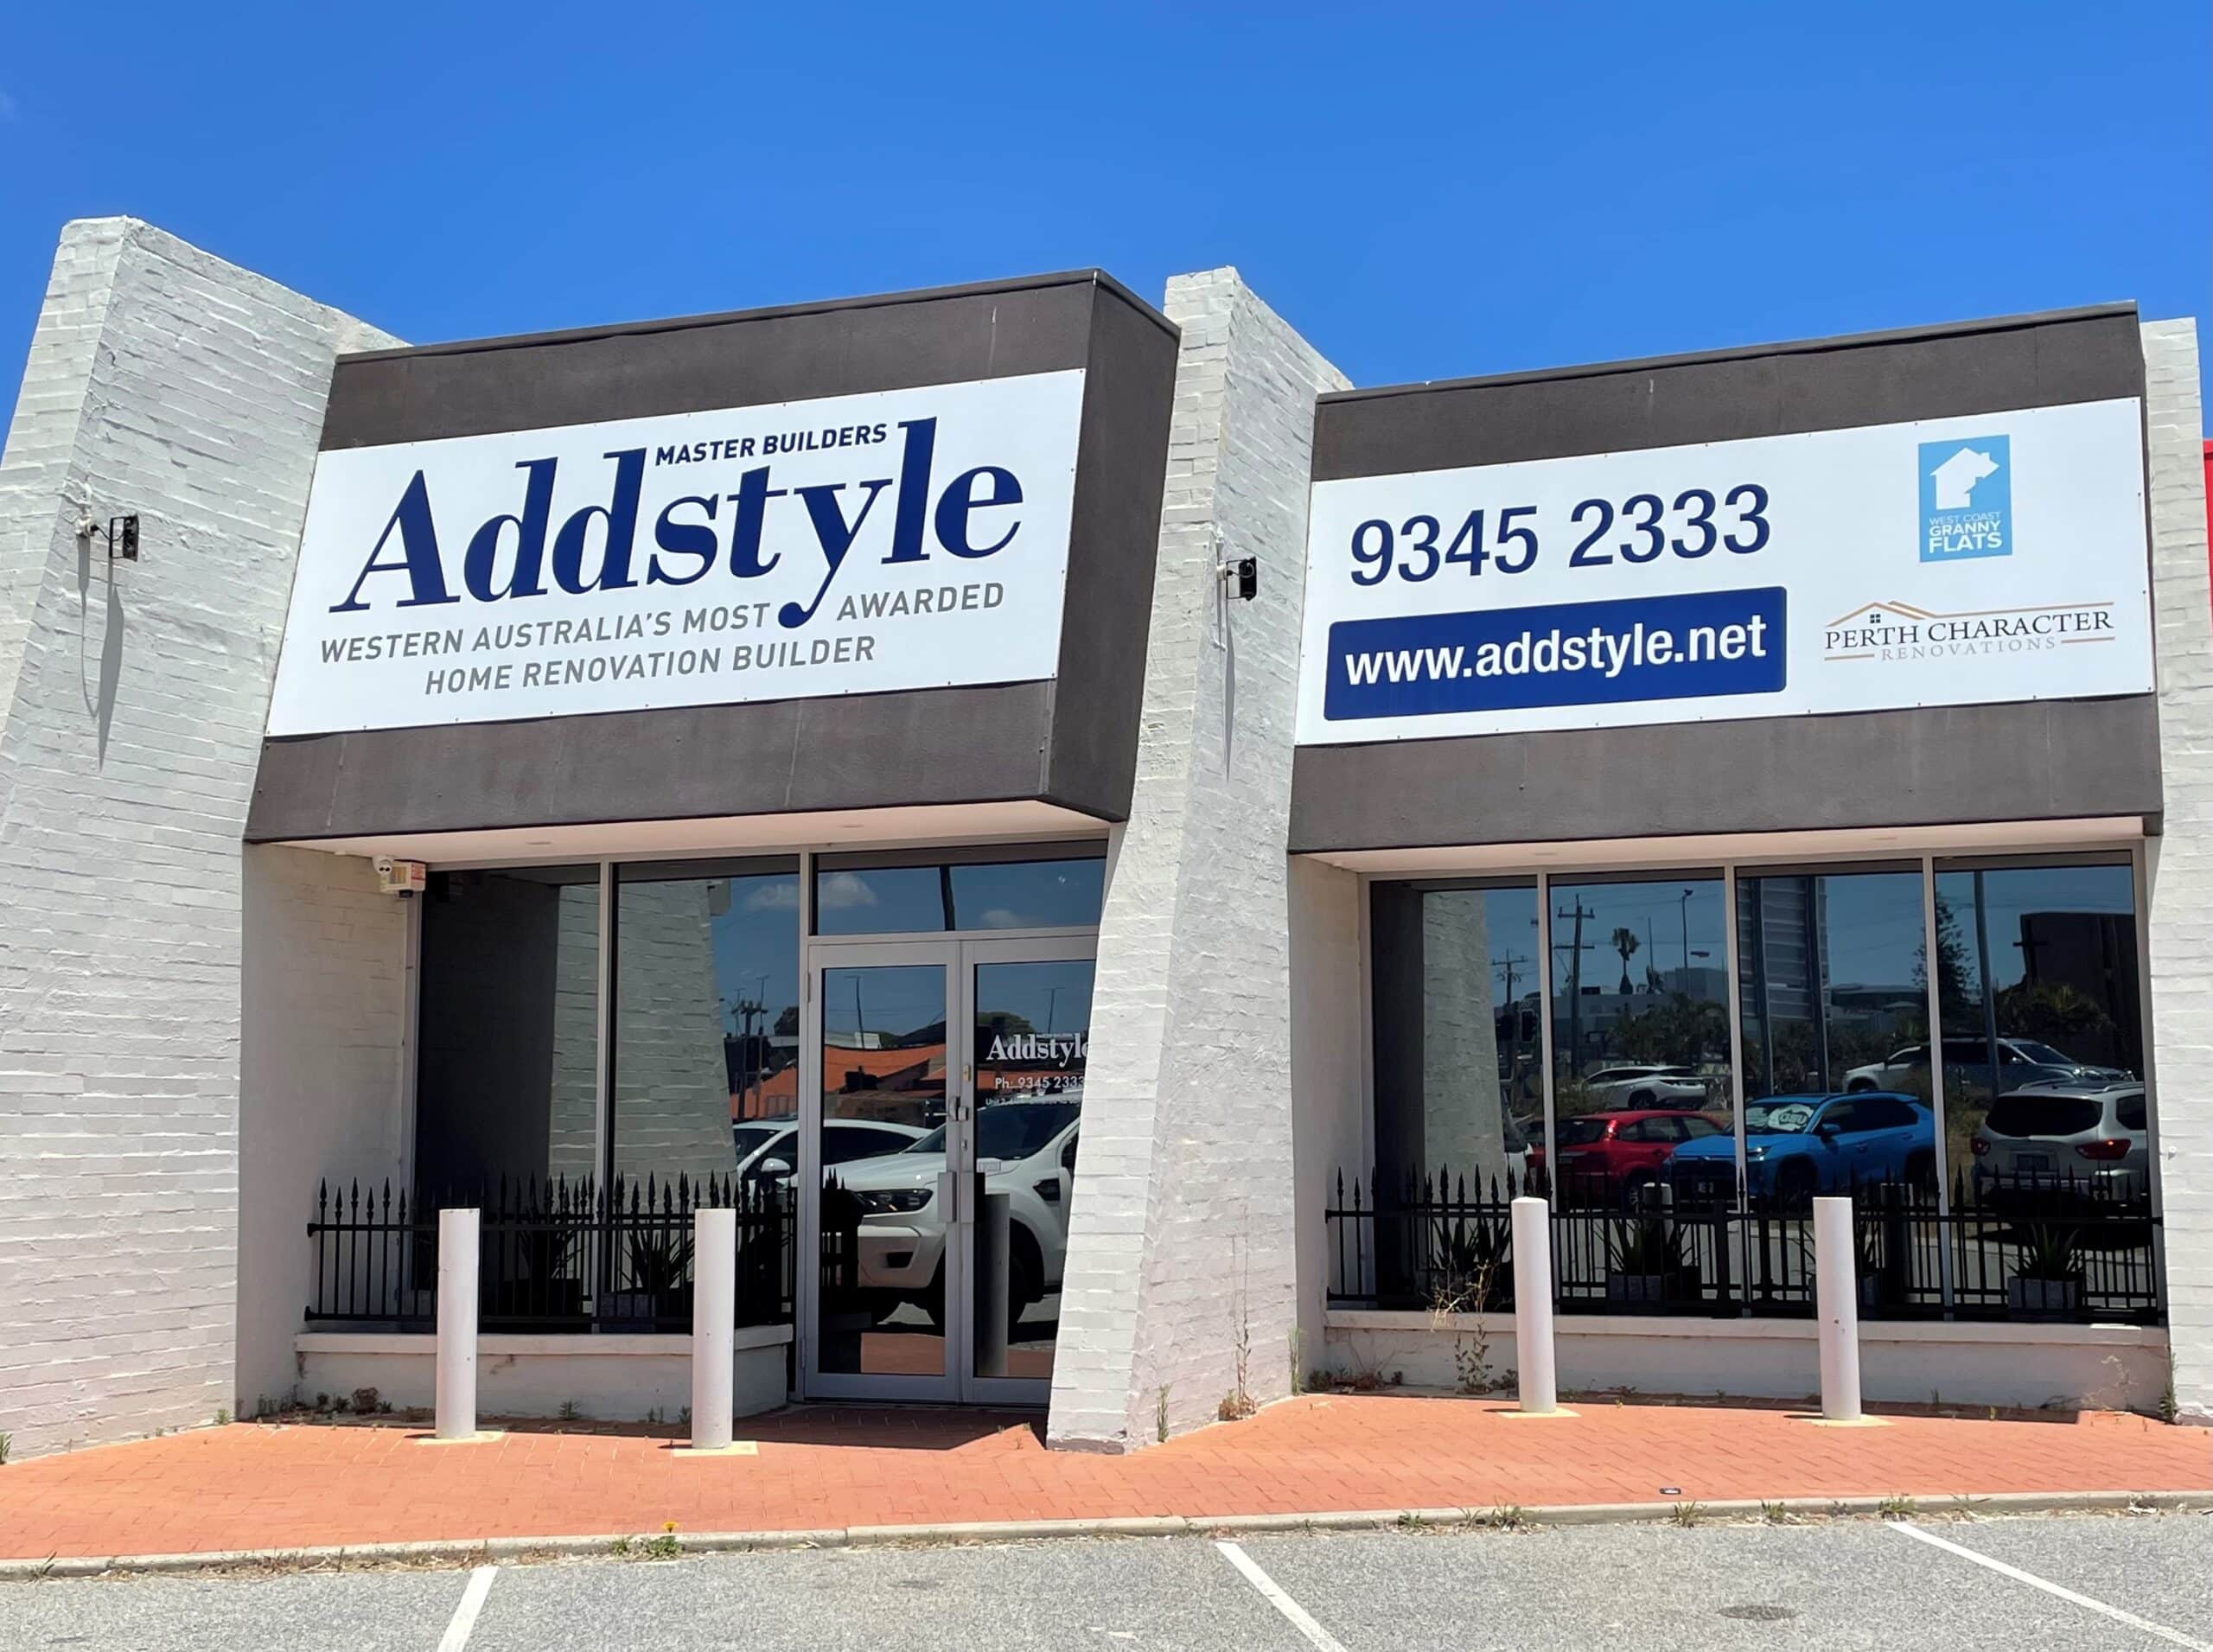 Addstyle office